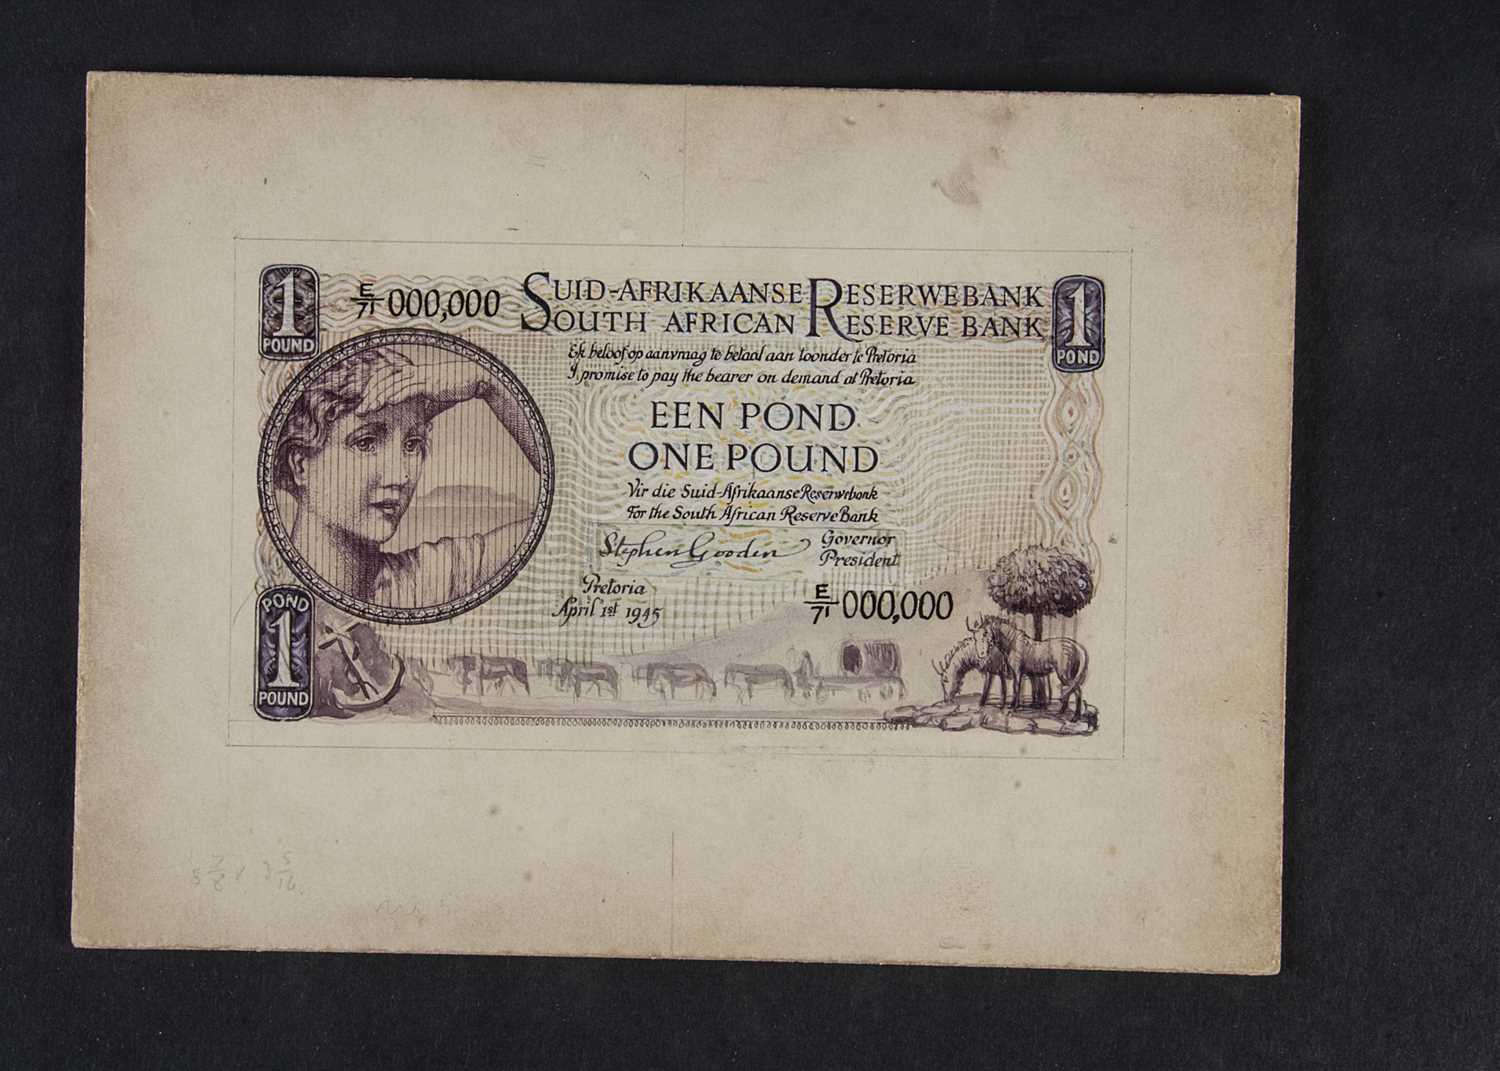 Lot 550 - South African Reserve Bank